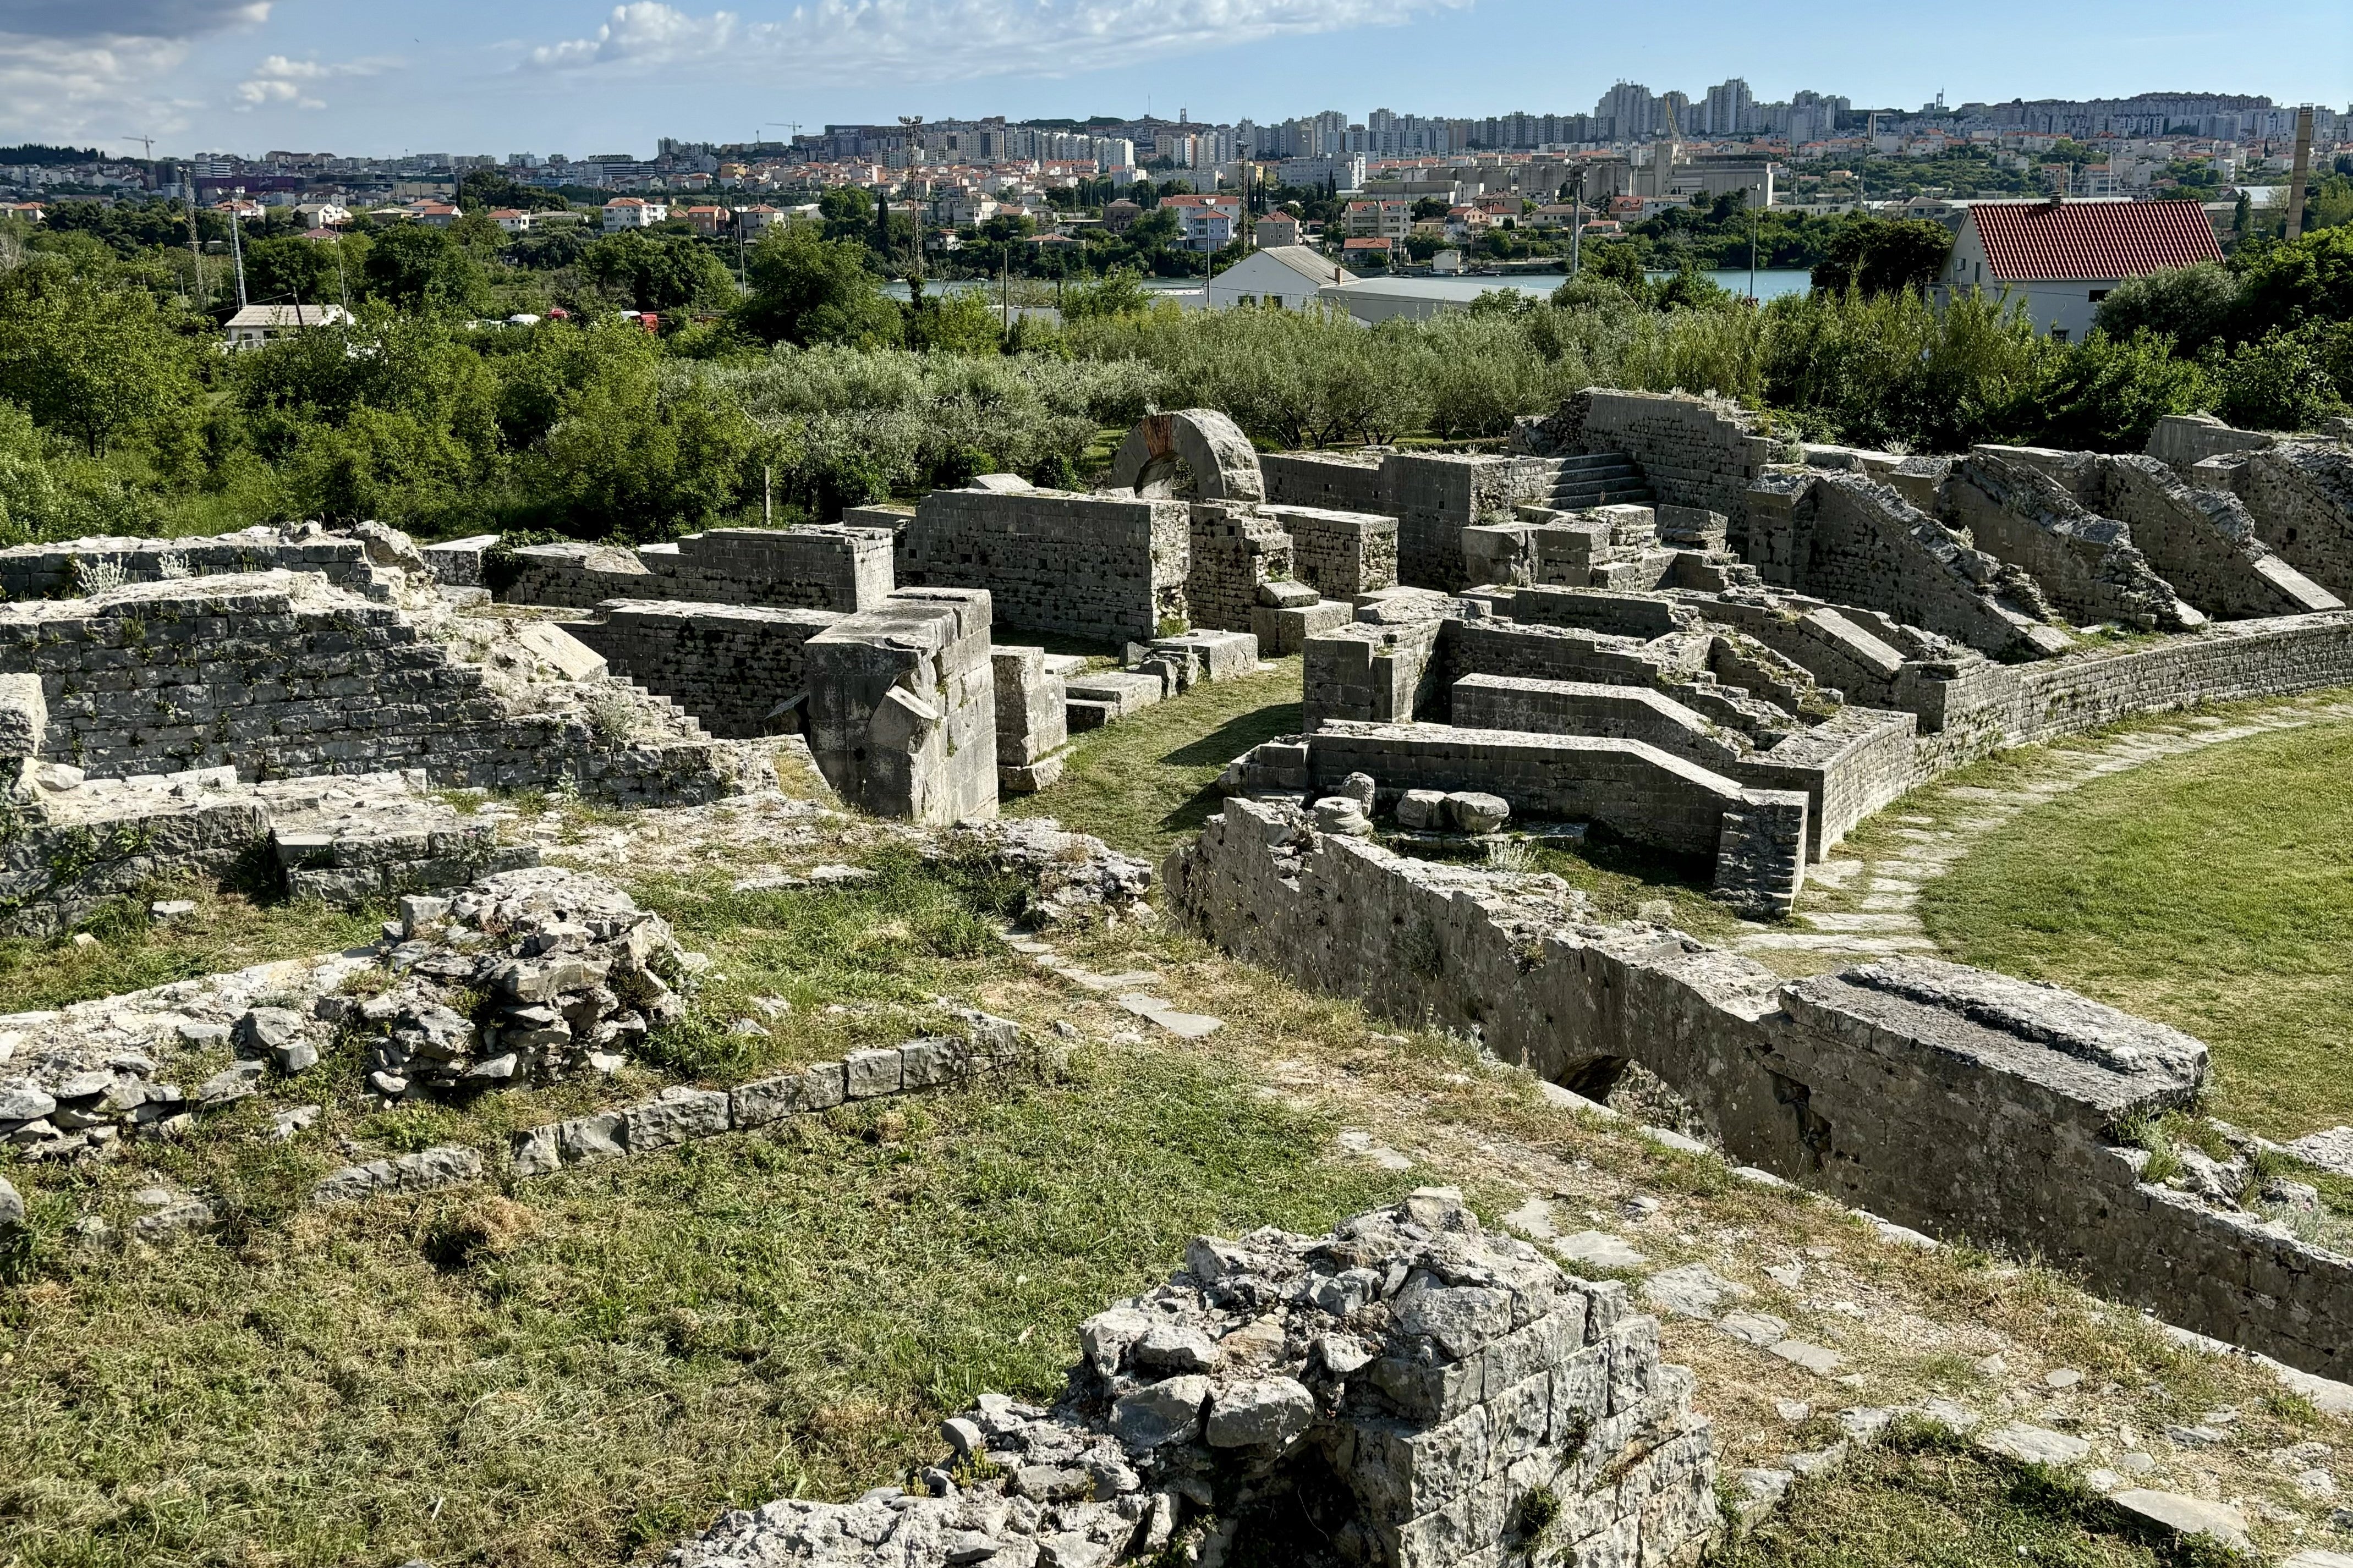 South of Trogir on the coast is Salona, home to the staggering ruins of a 2nd-century amphitheatre